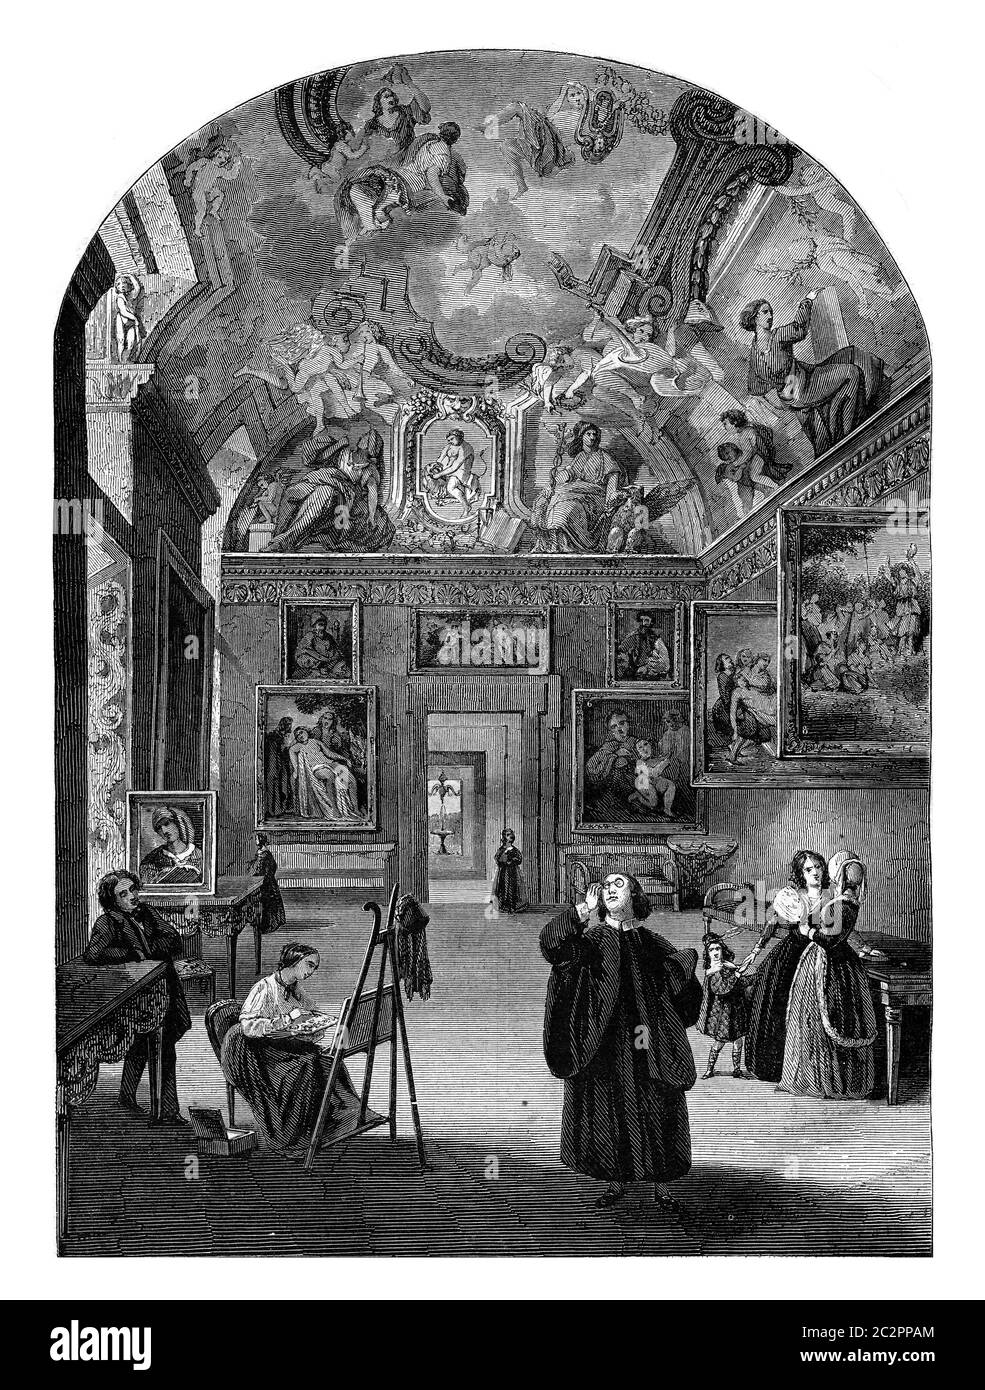 Borghese Gallery, vintage engraved illustration. Magasin Pittoresque 1847. Stock Photo